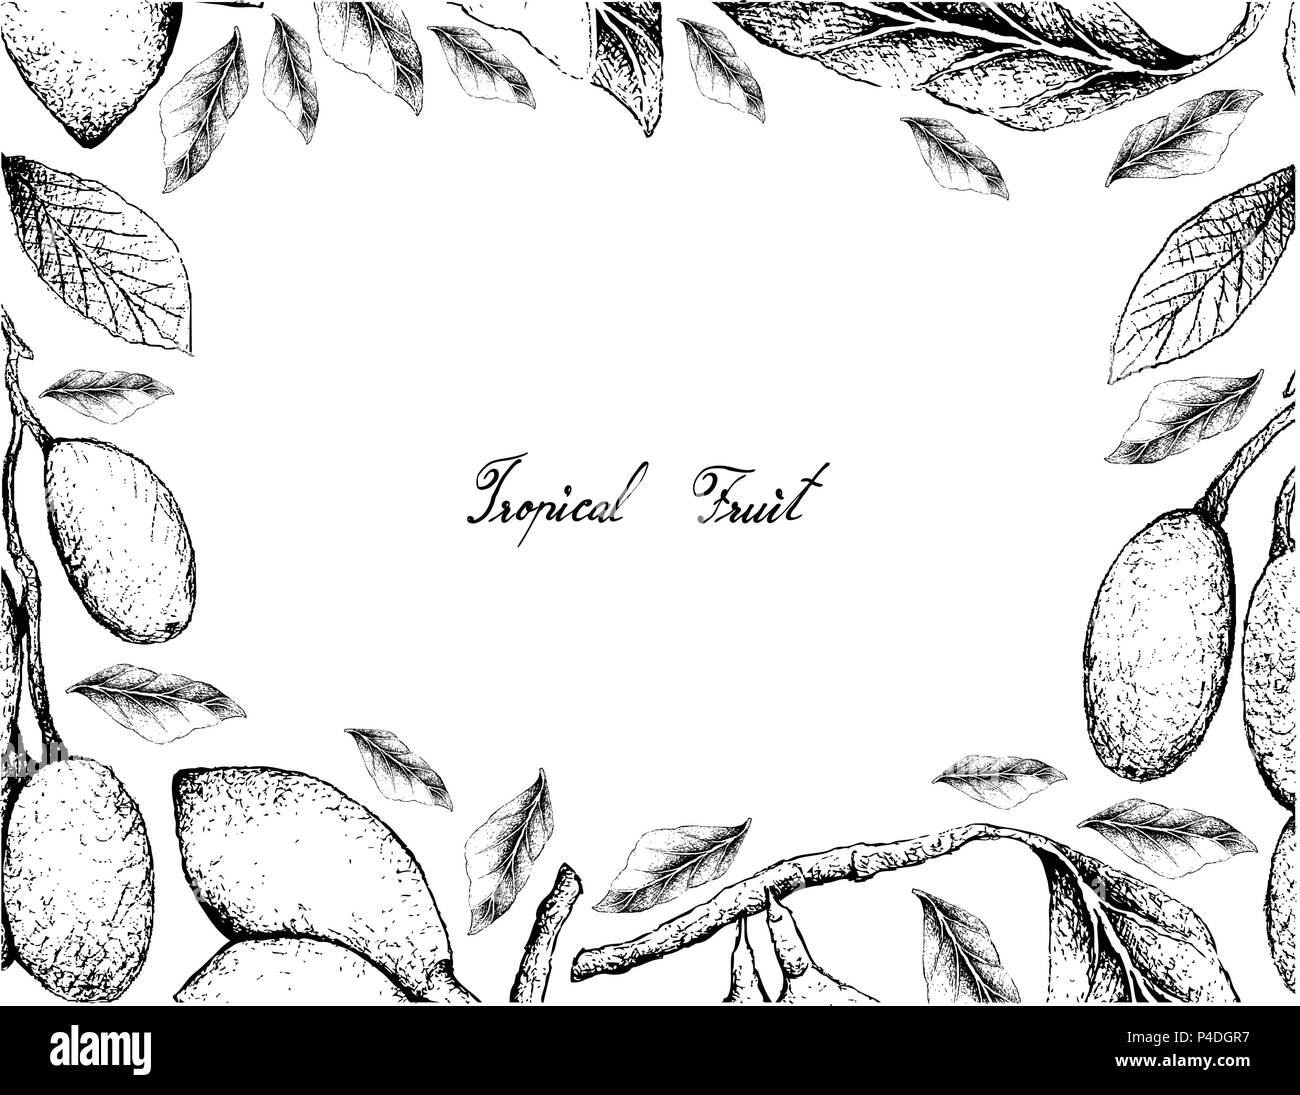 Tropical Fruit, Illustration Frame of Hand Drawn Sketch of Fresh Elaeocarpus Hygrophilus Curriola or Pouteria Ramiflora Fruits Isolated on White Backg Stock Vector